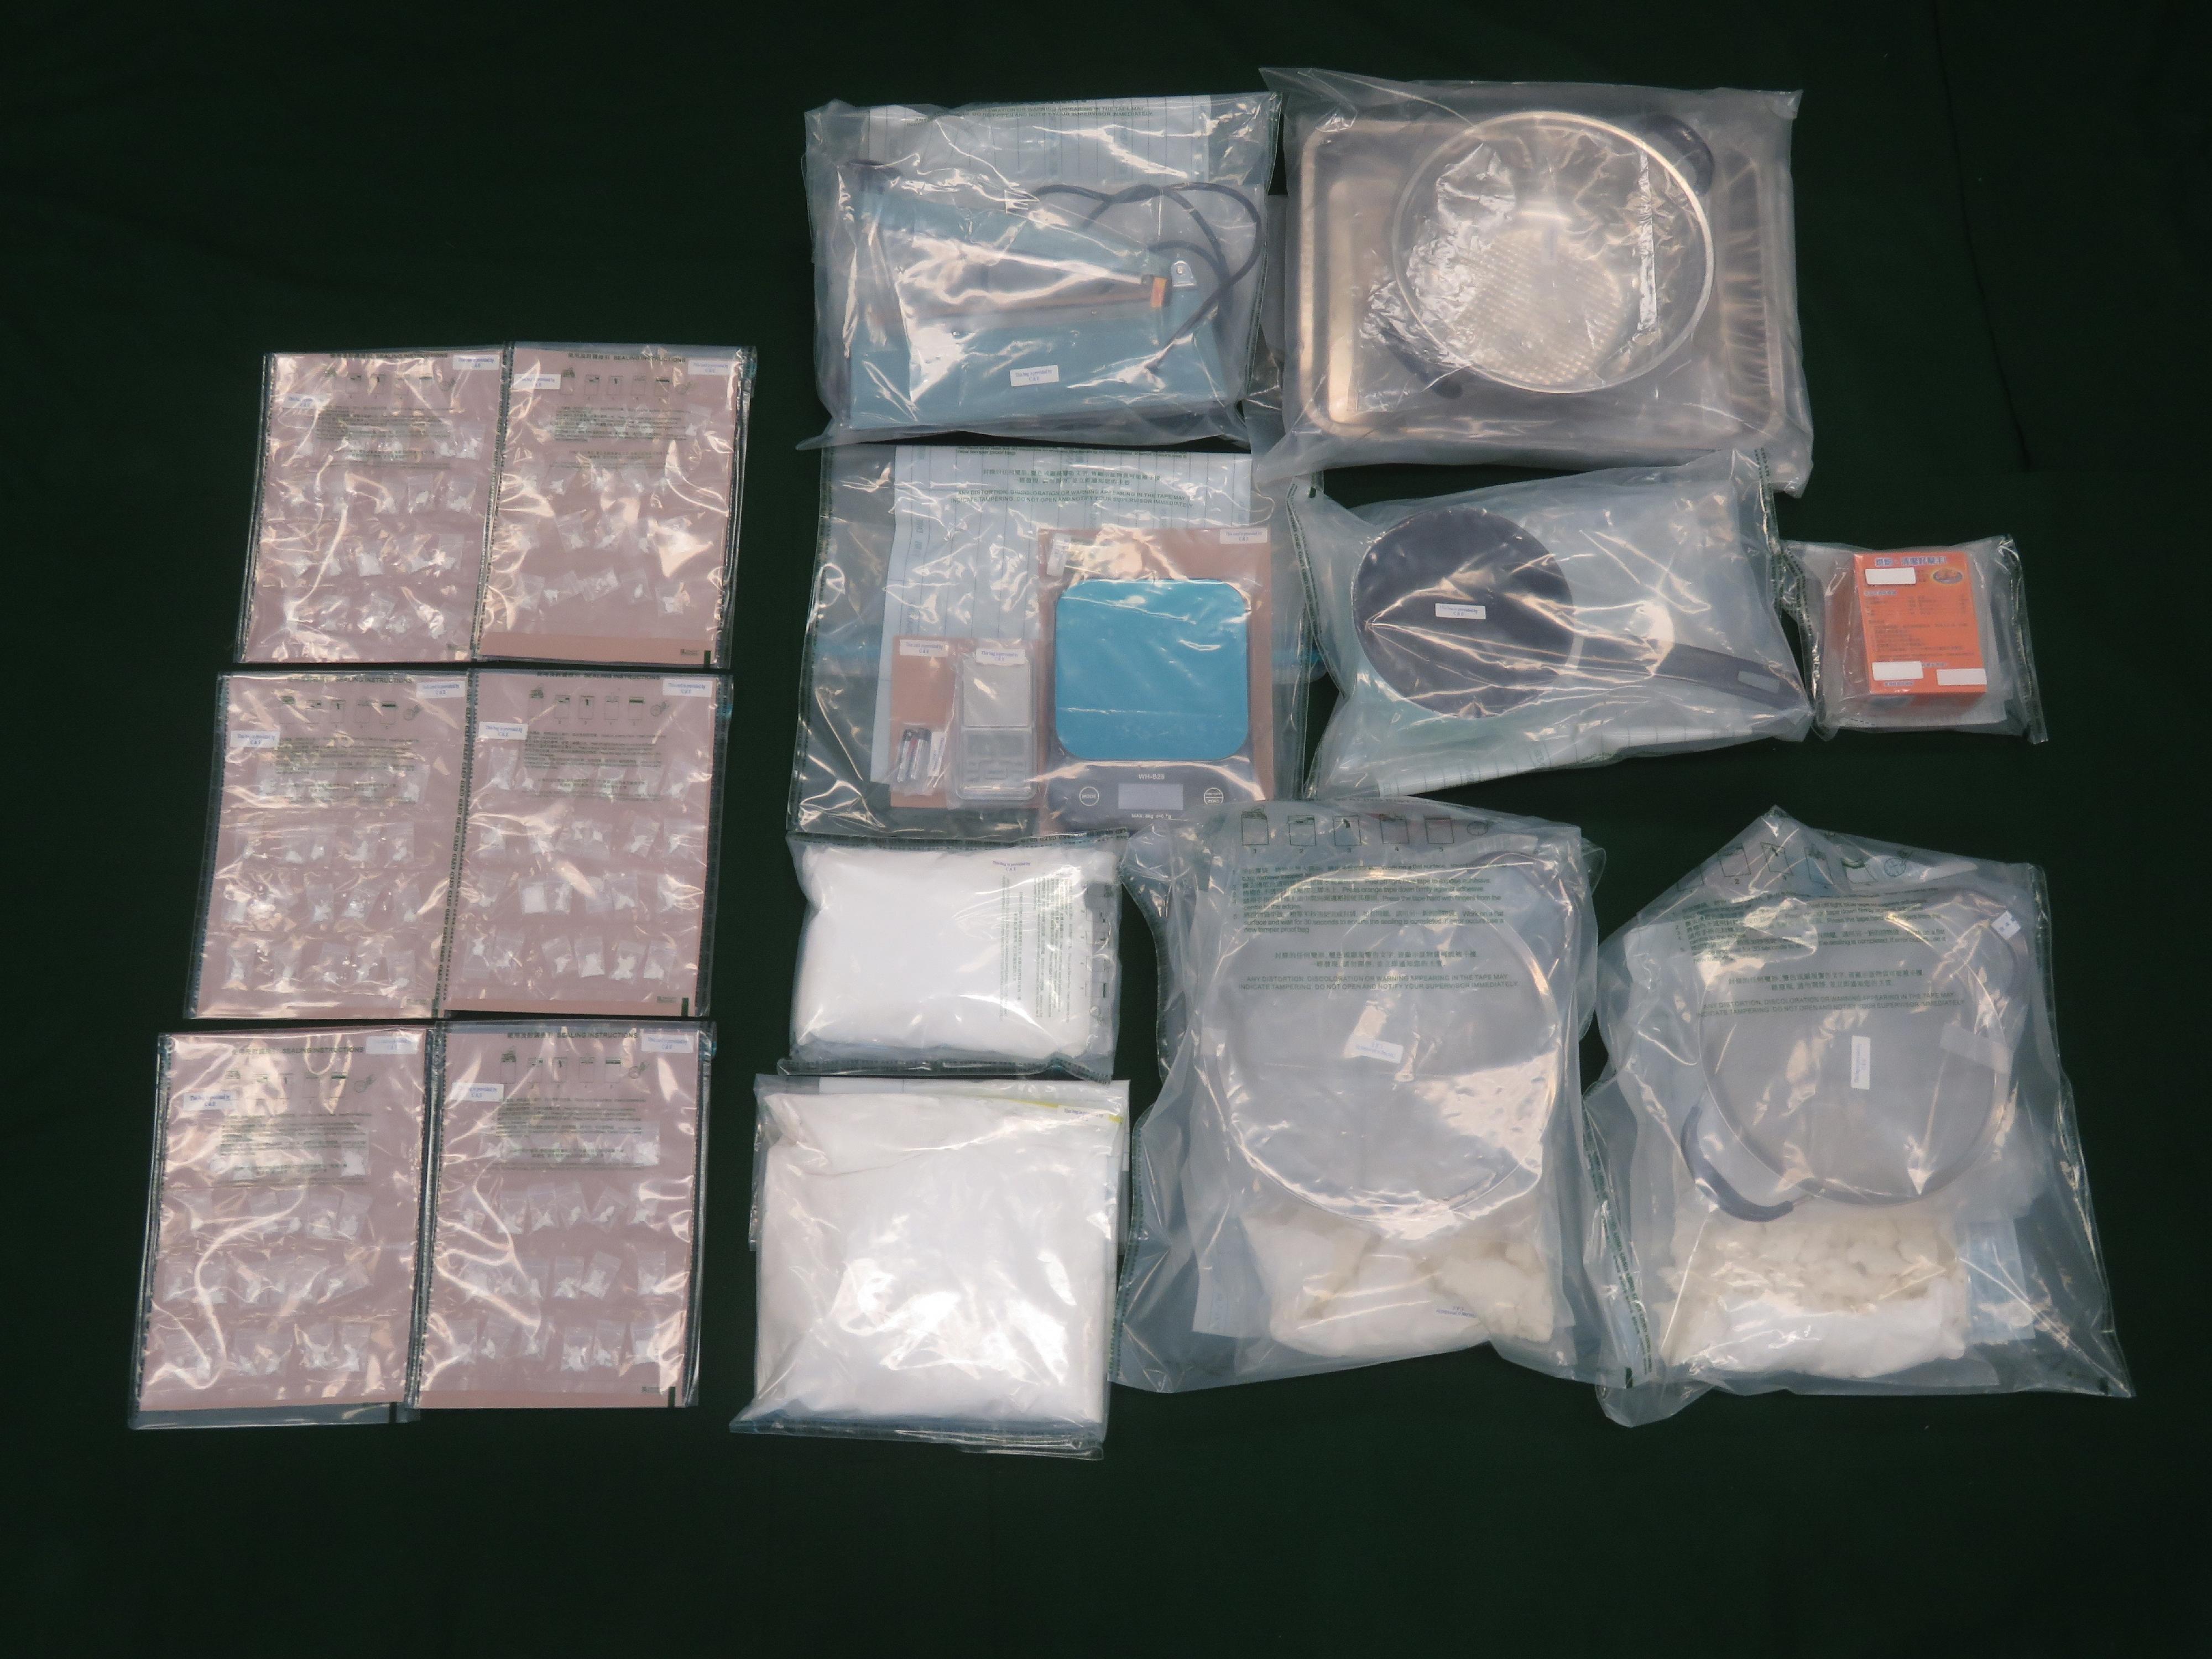 Hong Kong Customs yesterday (July 9) seized about 1.1 kilograms of suspected cocaine and about 540 grams of suspected crack cocaine with a total estimated market value of about $1.9 million in Sham Shui Po. Photo shows the suspected dangerous drugs, drug manufacturing and packaging paraphernalia seized.